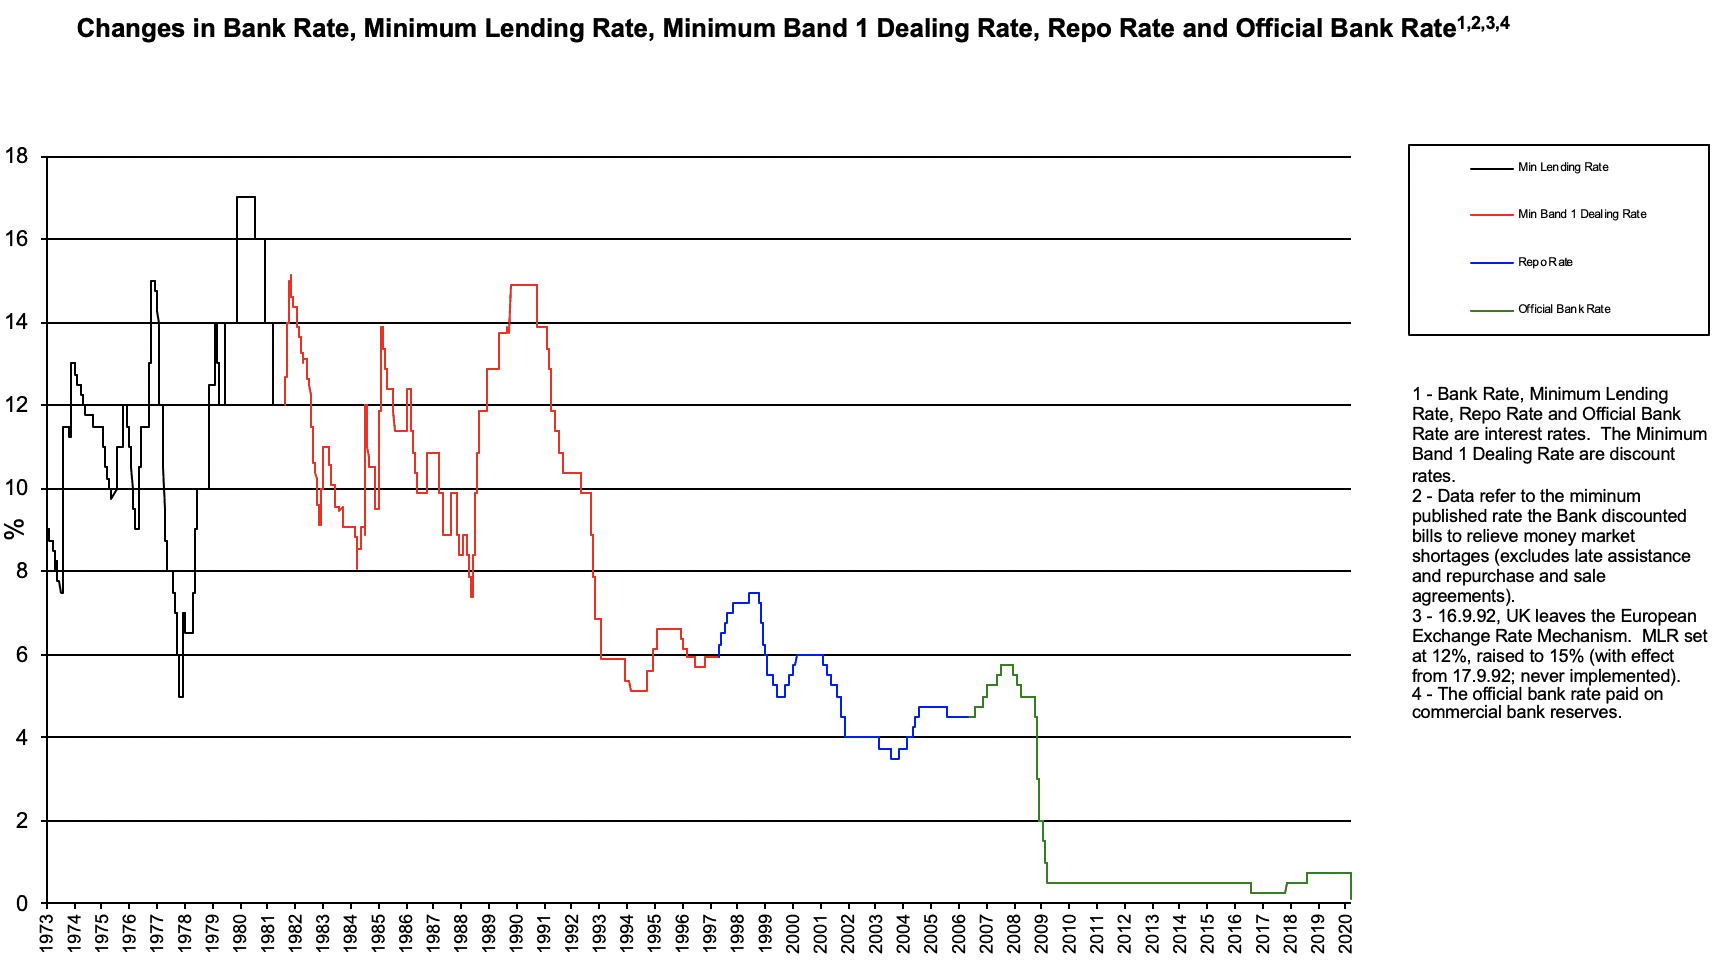 Bank of England historical rates